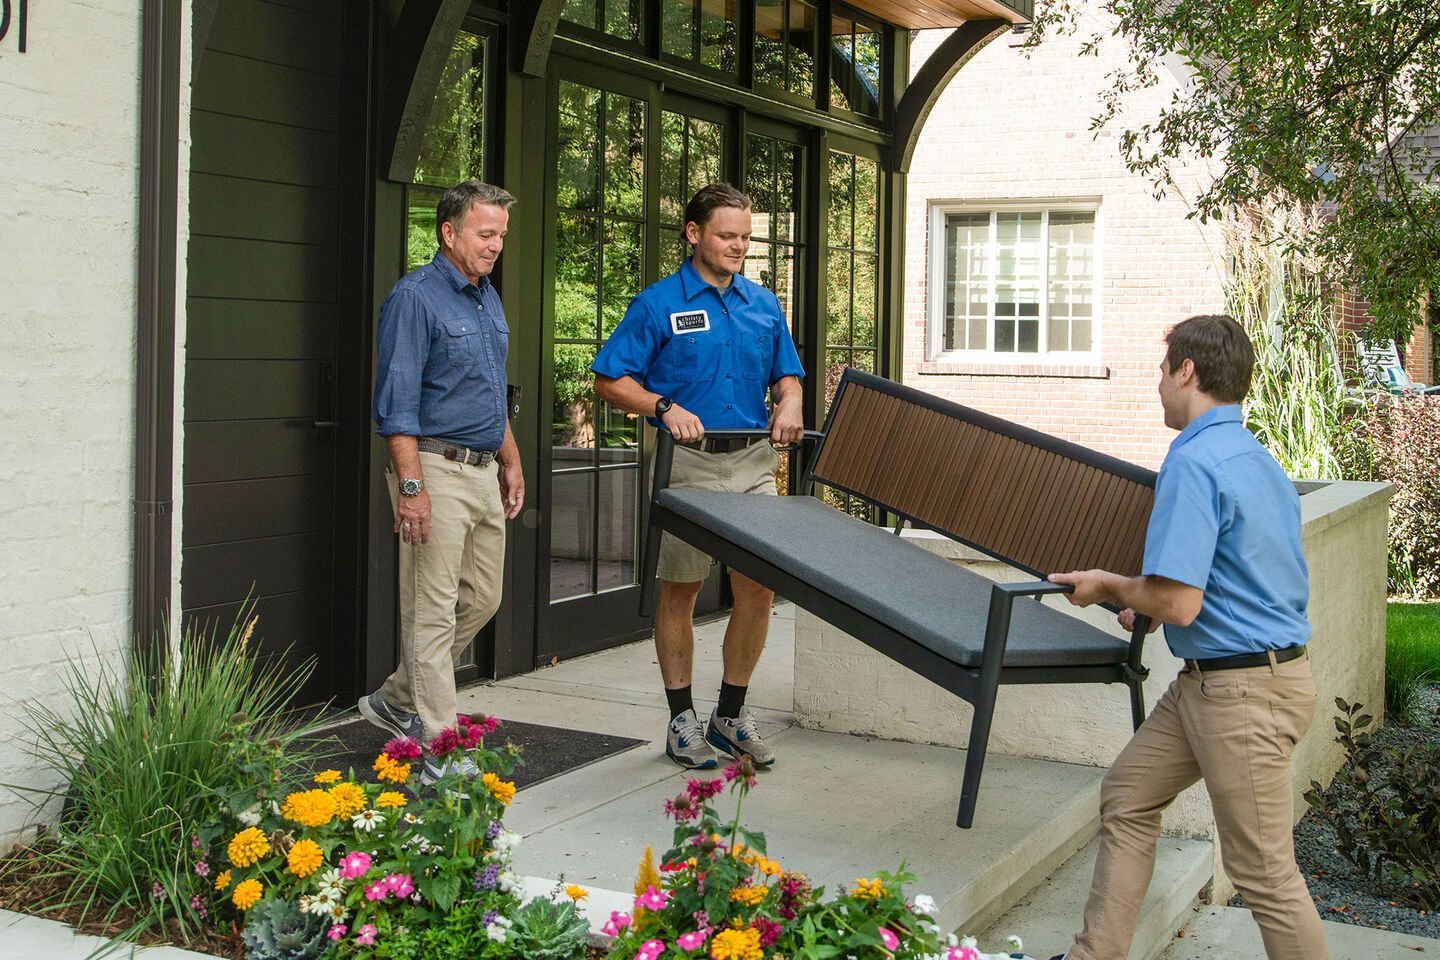 Christy Sports employees delivering outdoor furniture